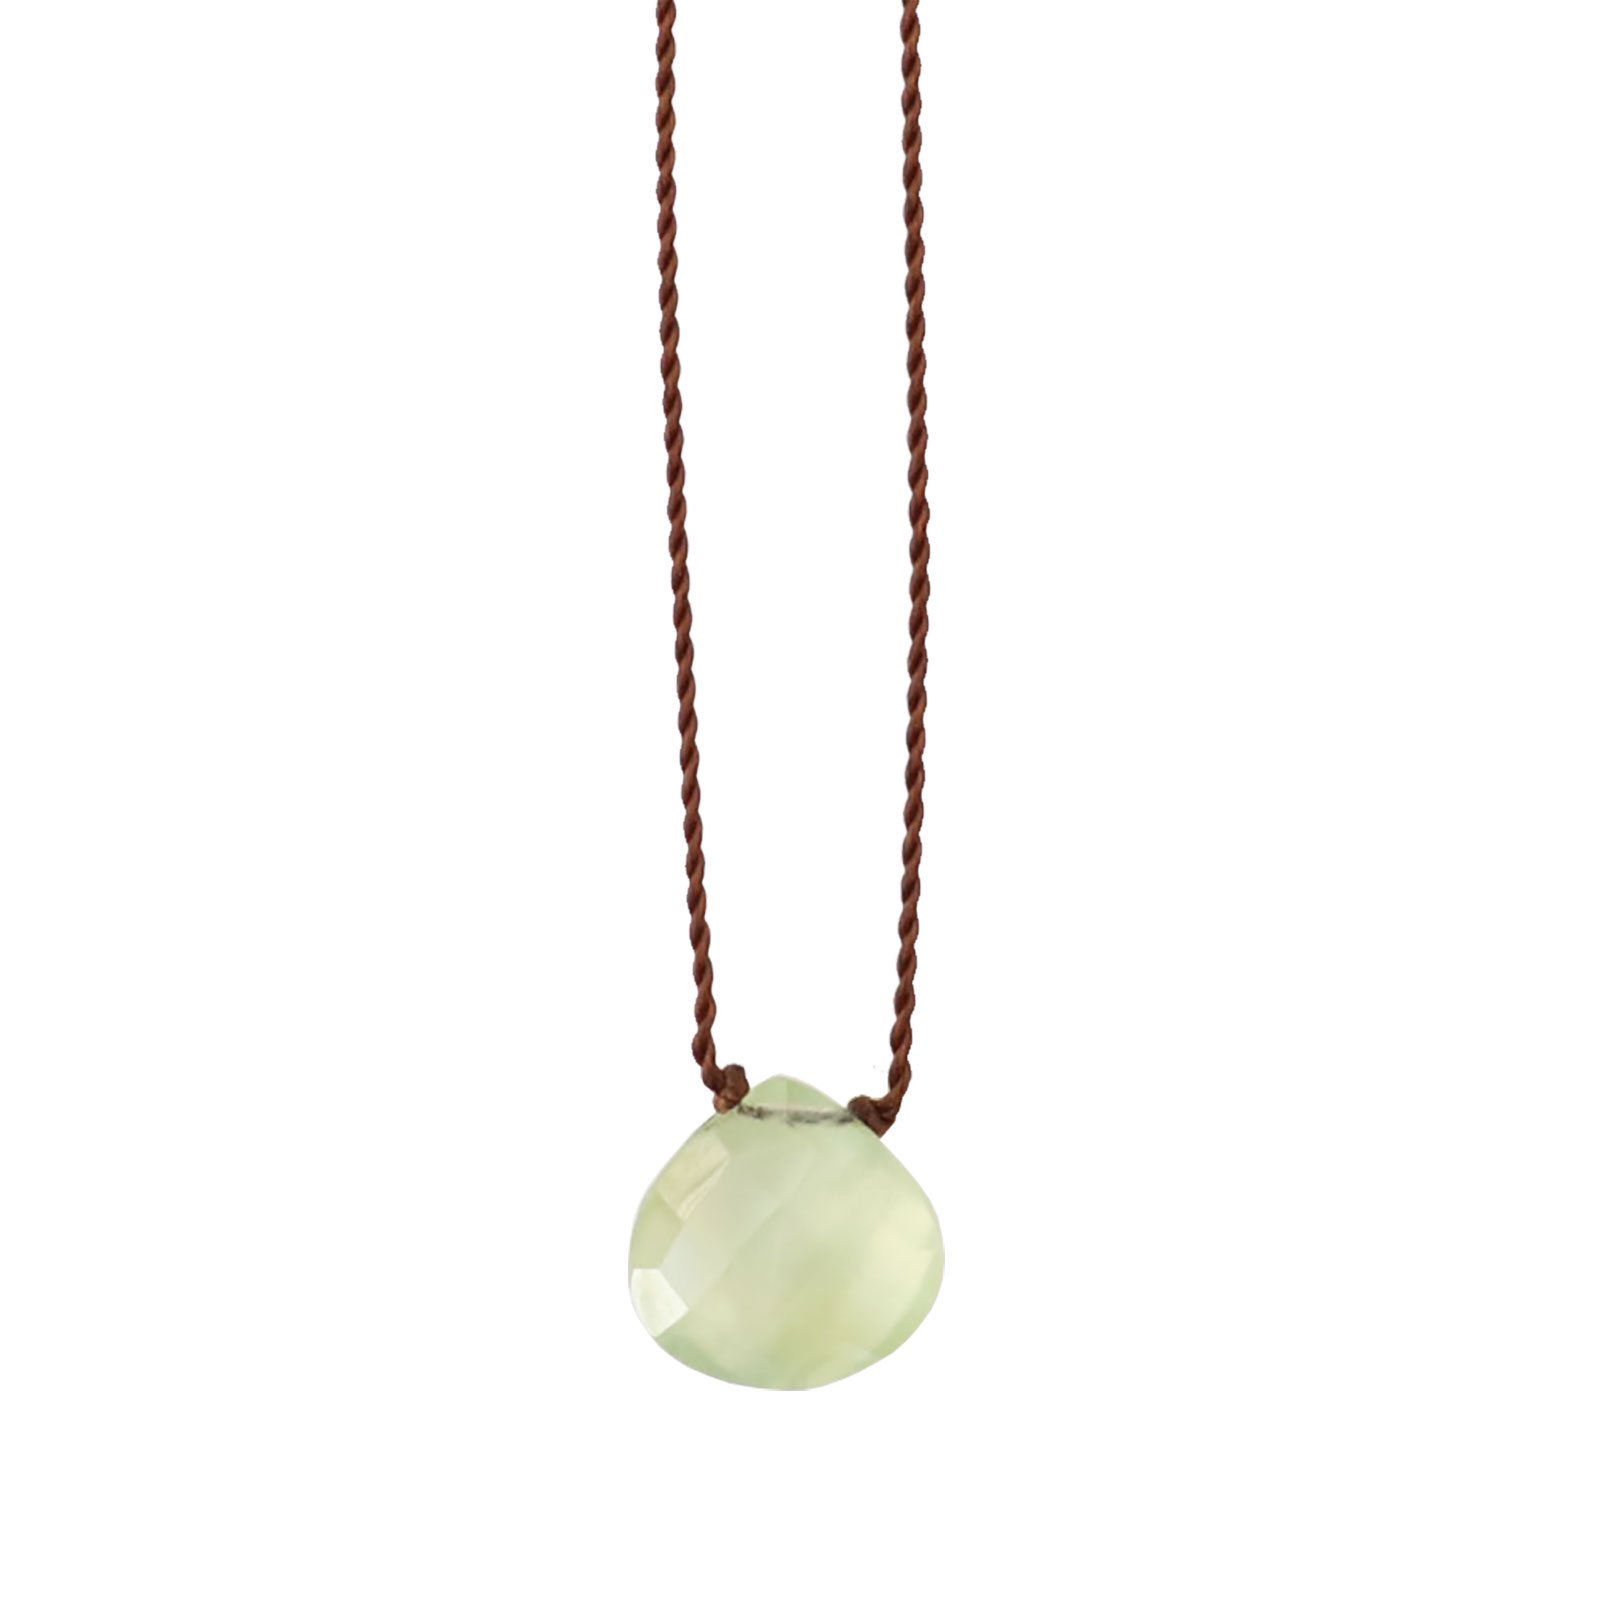 Margaret Solow | Smooth Stone Necklace | ץʥ